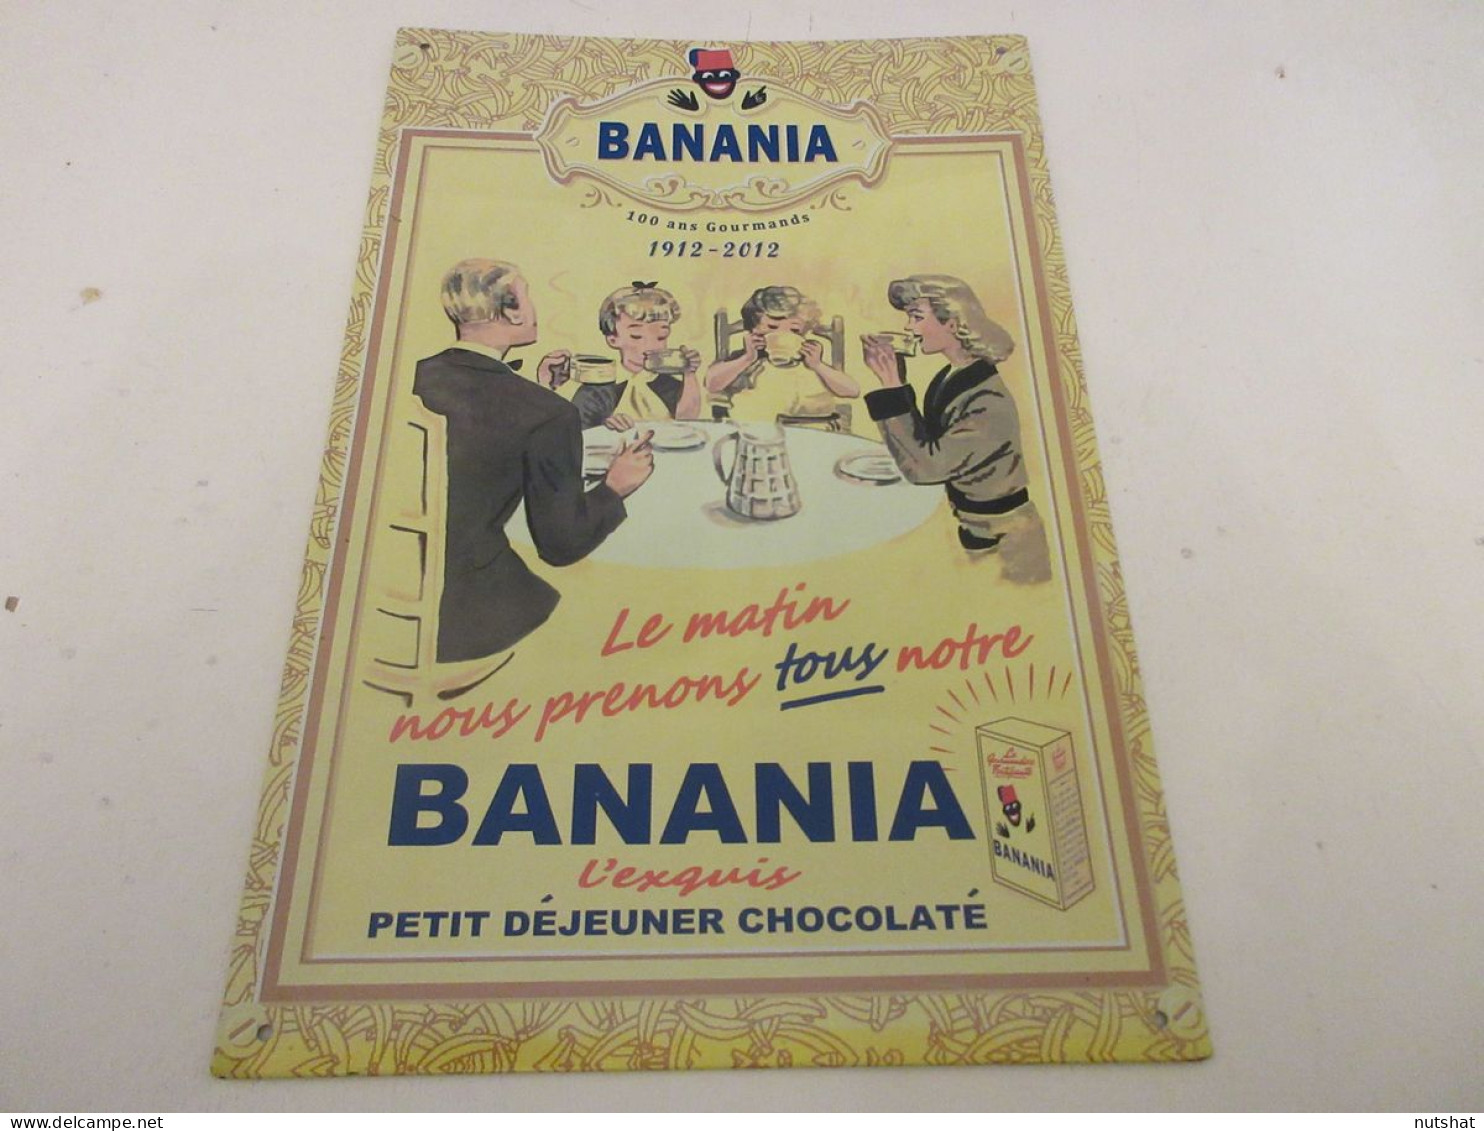 PLAQUE PUBLICITAIRE EMAILLEE BANANIA 100 ANS GOURMANDS 1912-2012 Taille 30x20cm - Emailschilder (ab 1960)